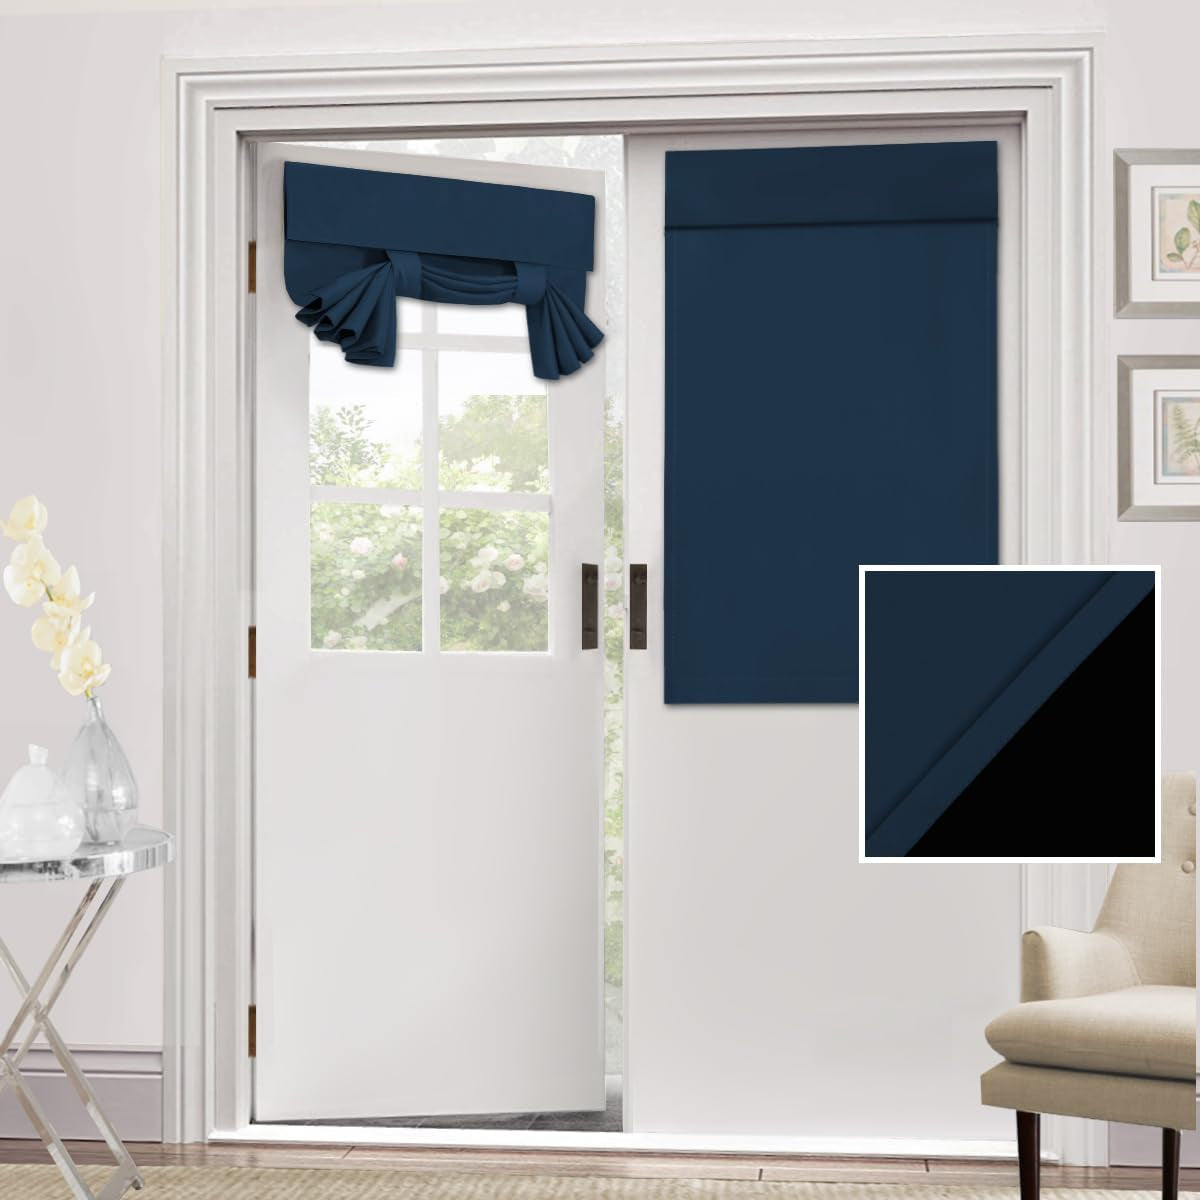 H.VERSAILTEX 100% Blackout Door Curtain - Small French Door Curtains for Doors Window, Thermal Insulated Adhesive Tricia Door Curtain, 26X40 Inches, 1 Panel, Pumice Stone  H.VERSAILTEX Navy 26"W X 40"L 